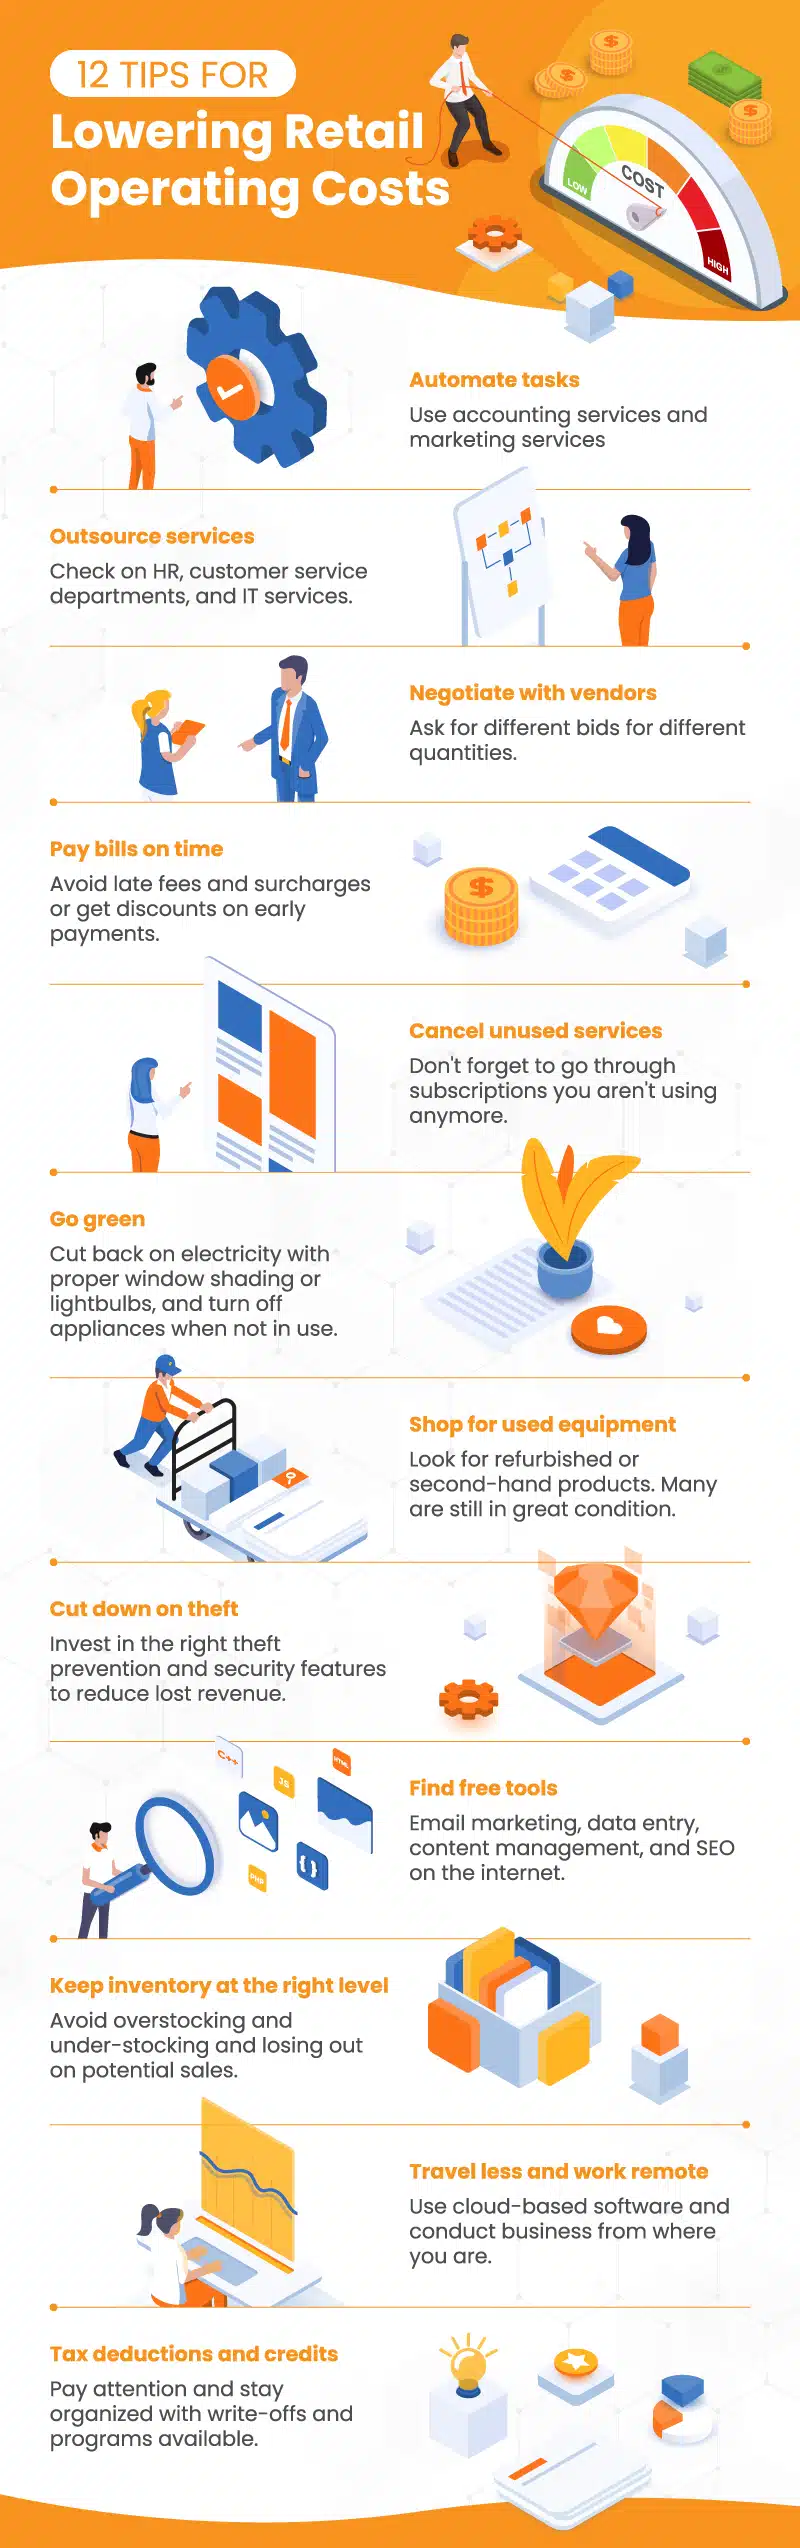 an infographic illustrating '12 tips for lowering retail operating costs'